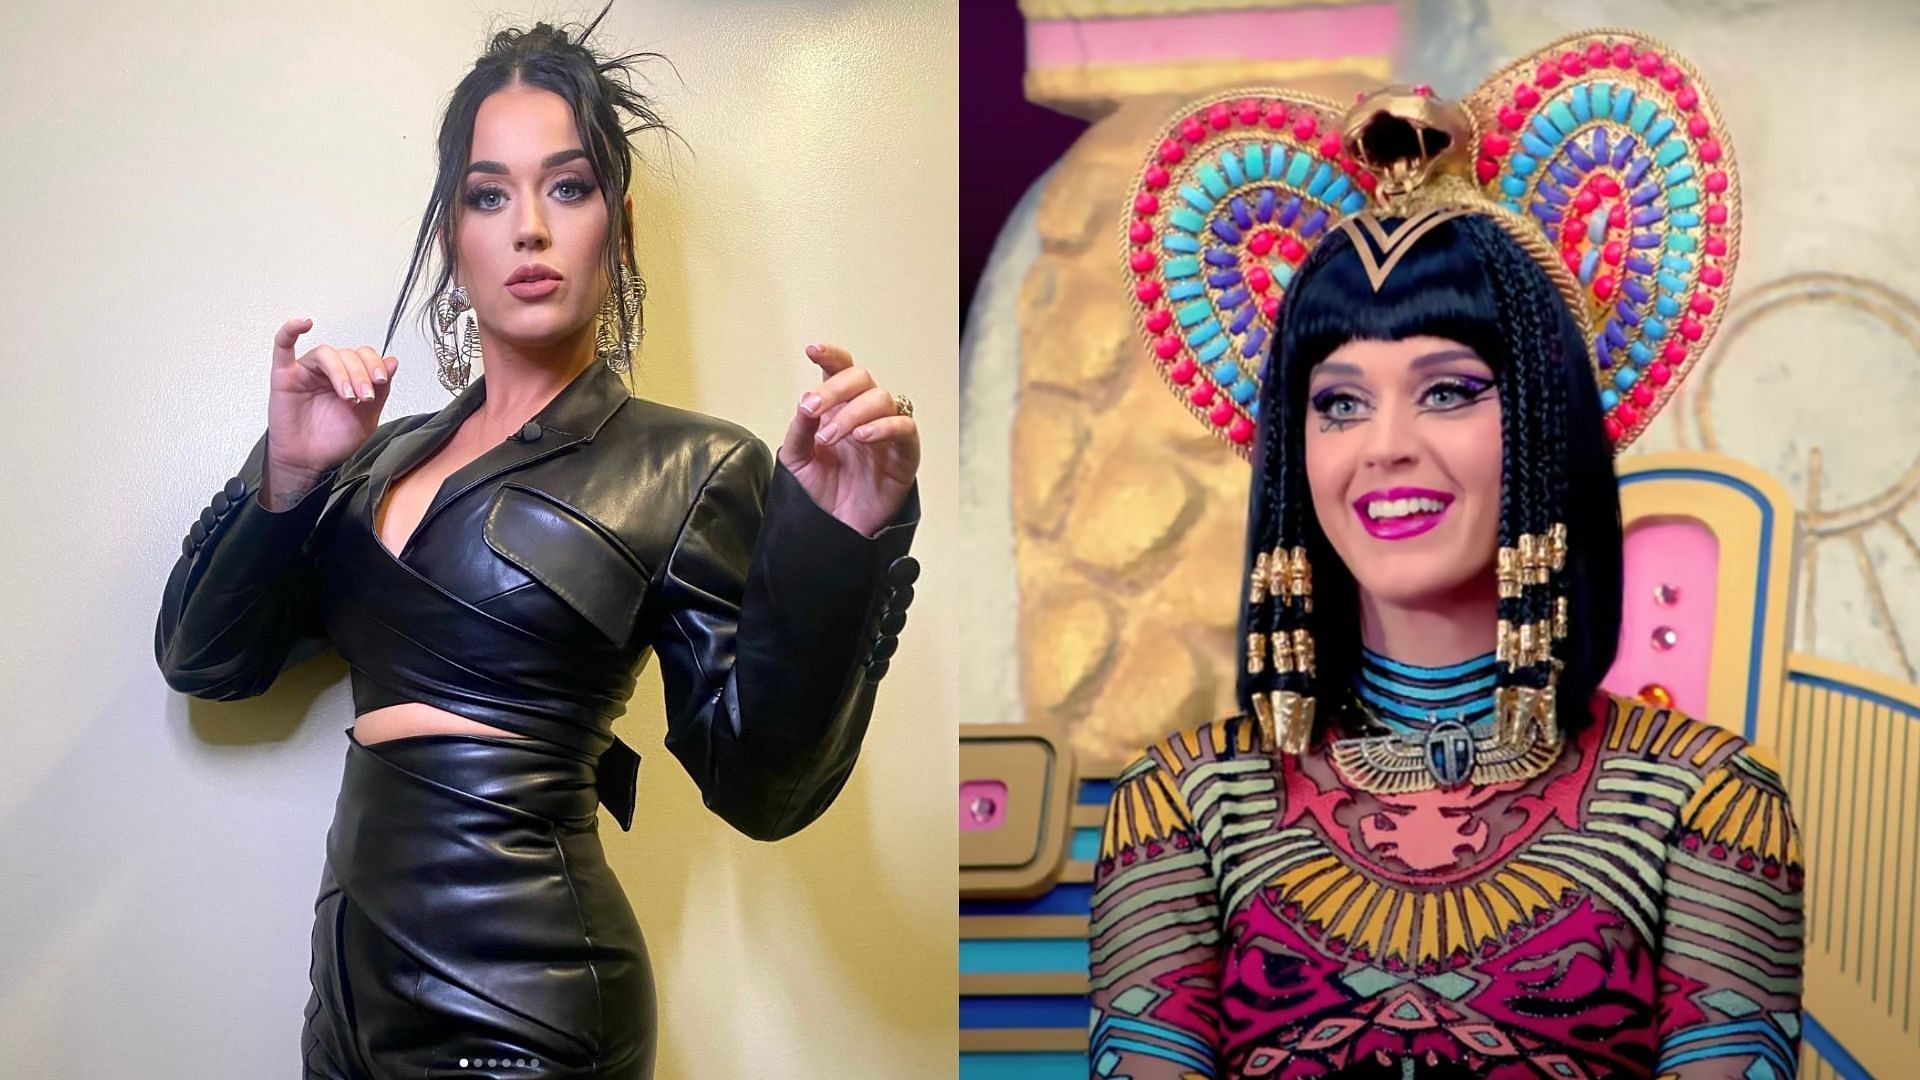 Katy Perry has emerged victorious in the Dark Horse copyright lawsuit that was filed back in 2014 by Christian rapper, Marcus Gray or Flame. (Images via Instagram / @KatyPerry and YouTube / still from Dark Horse)